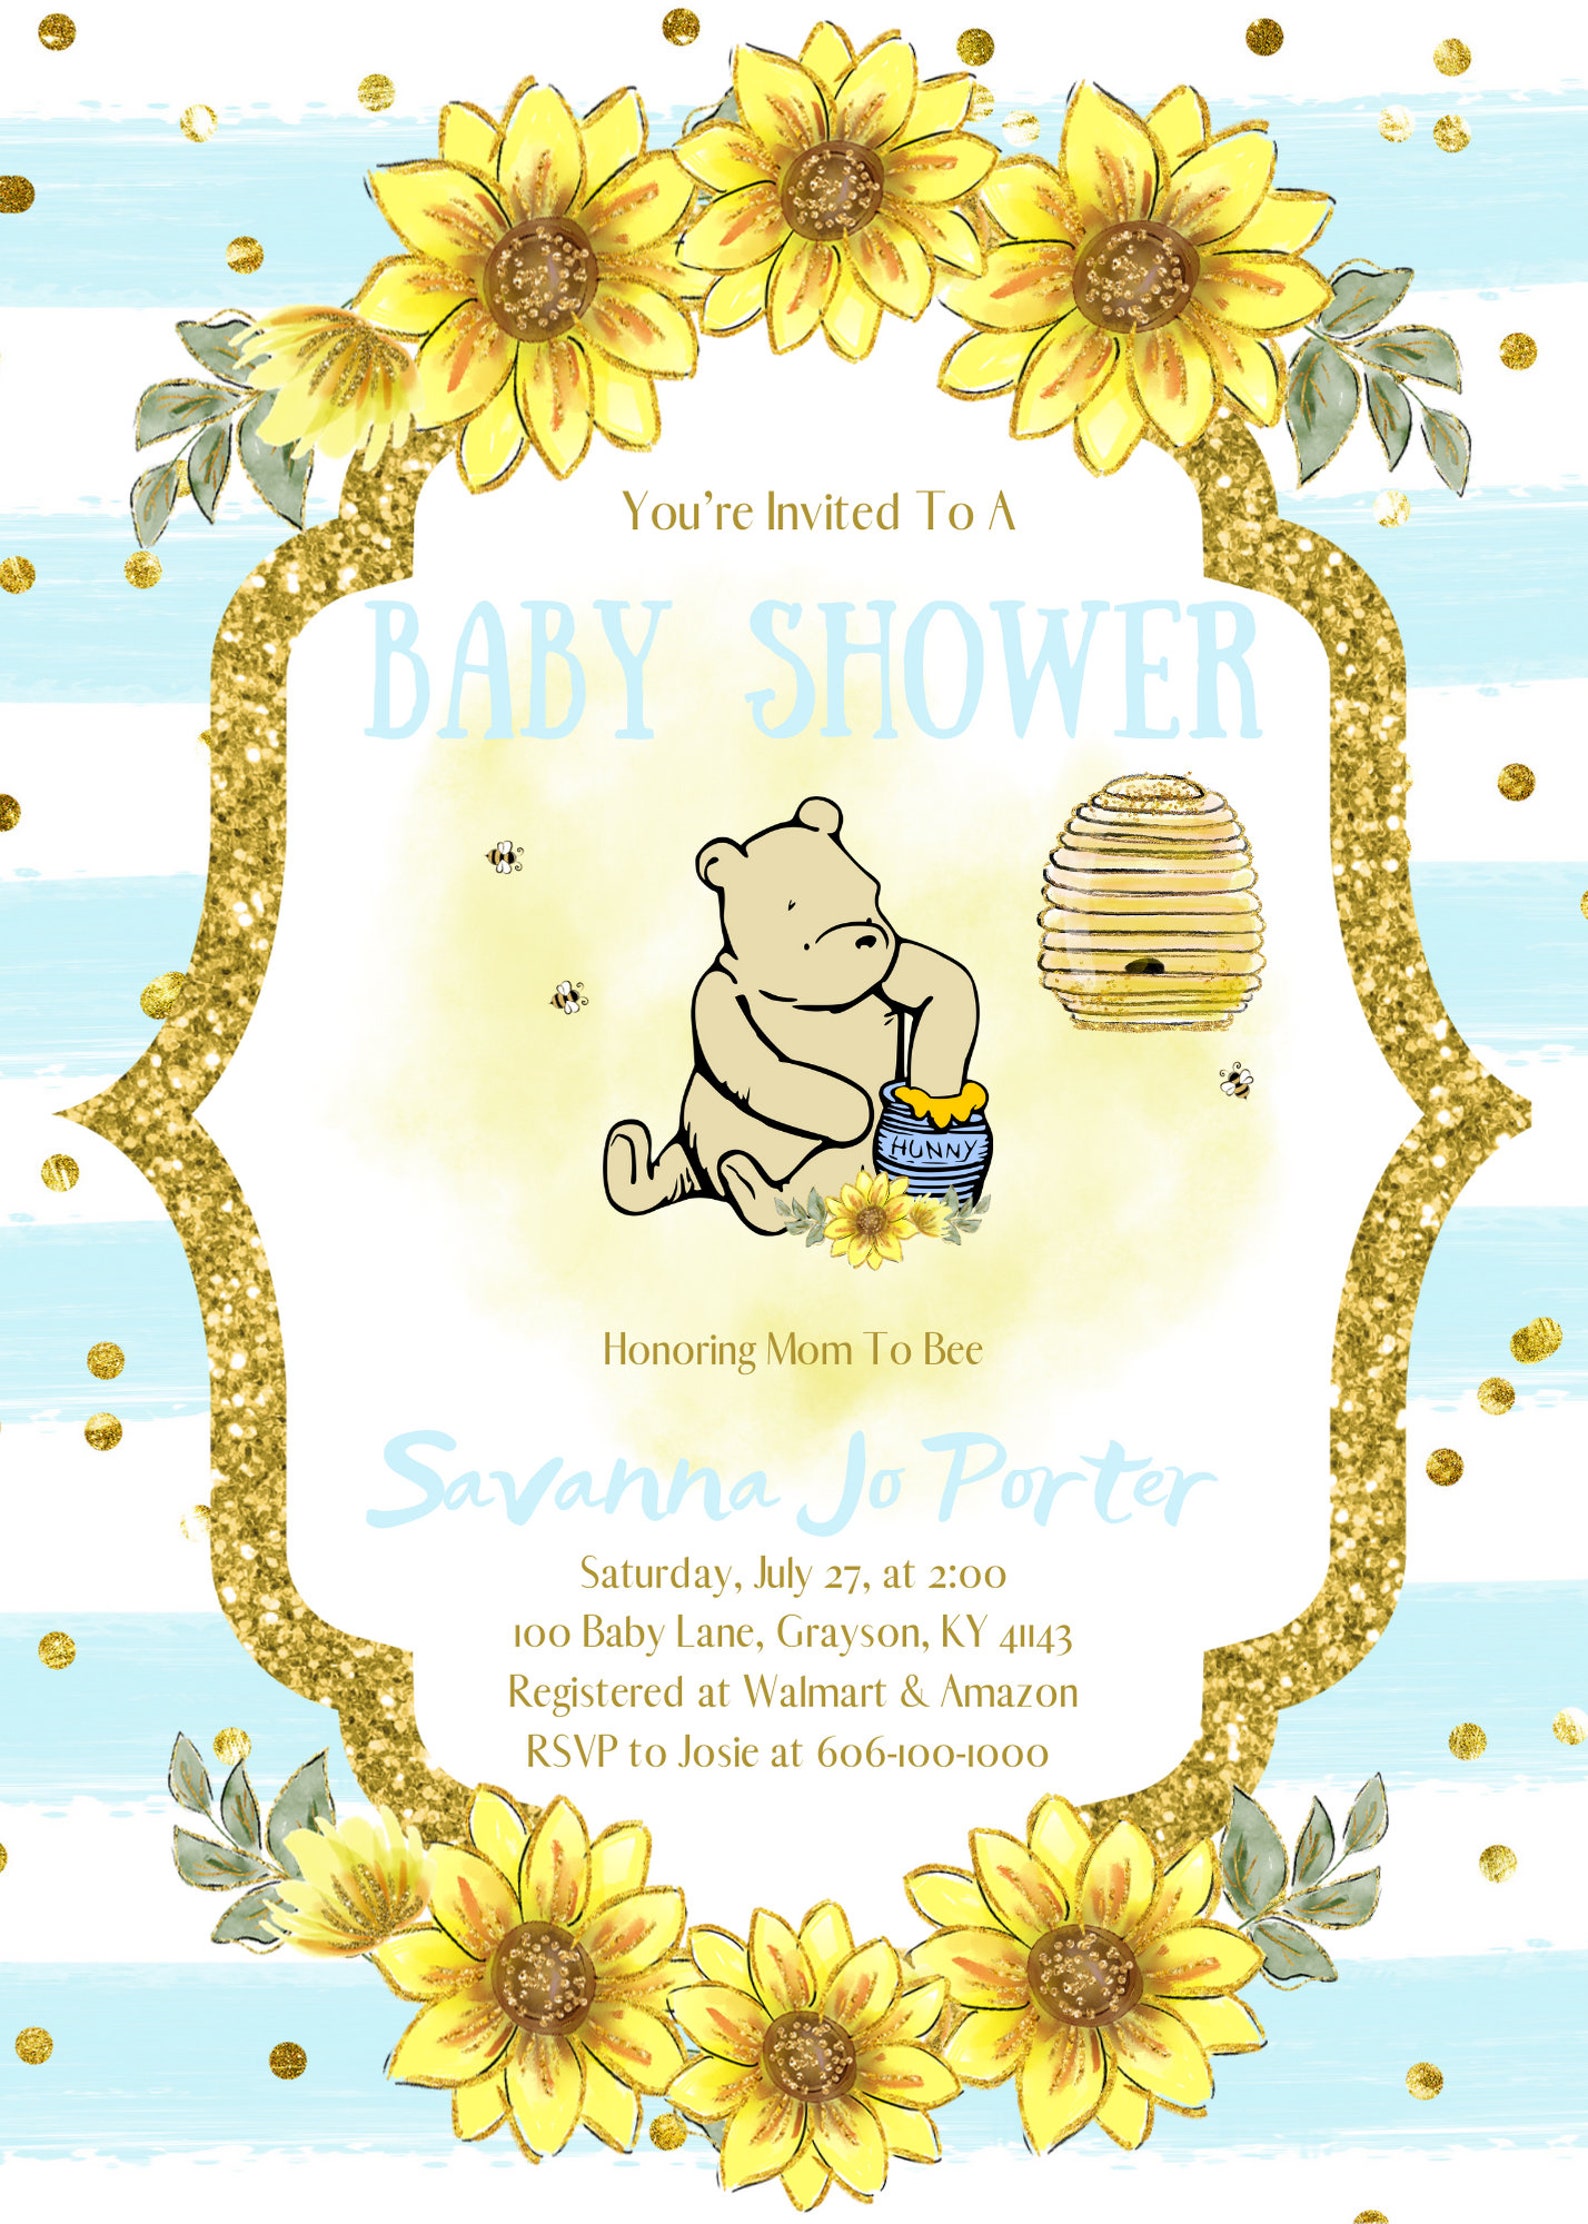 classic-winnie-the-pooh-baby-shower-invitation-for-a-boy-etsy